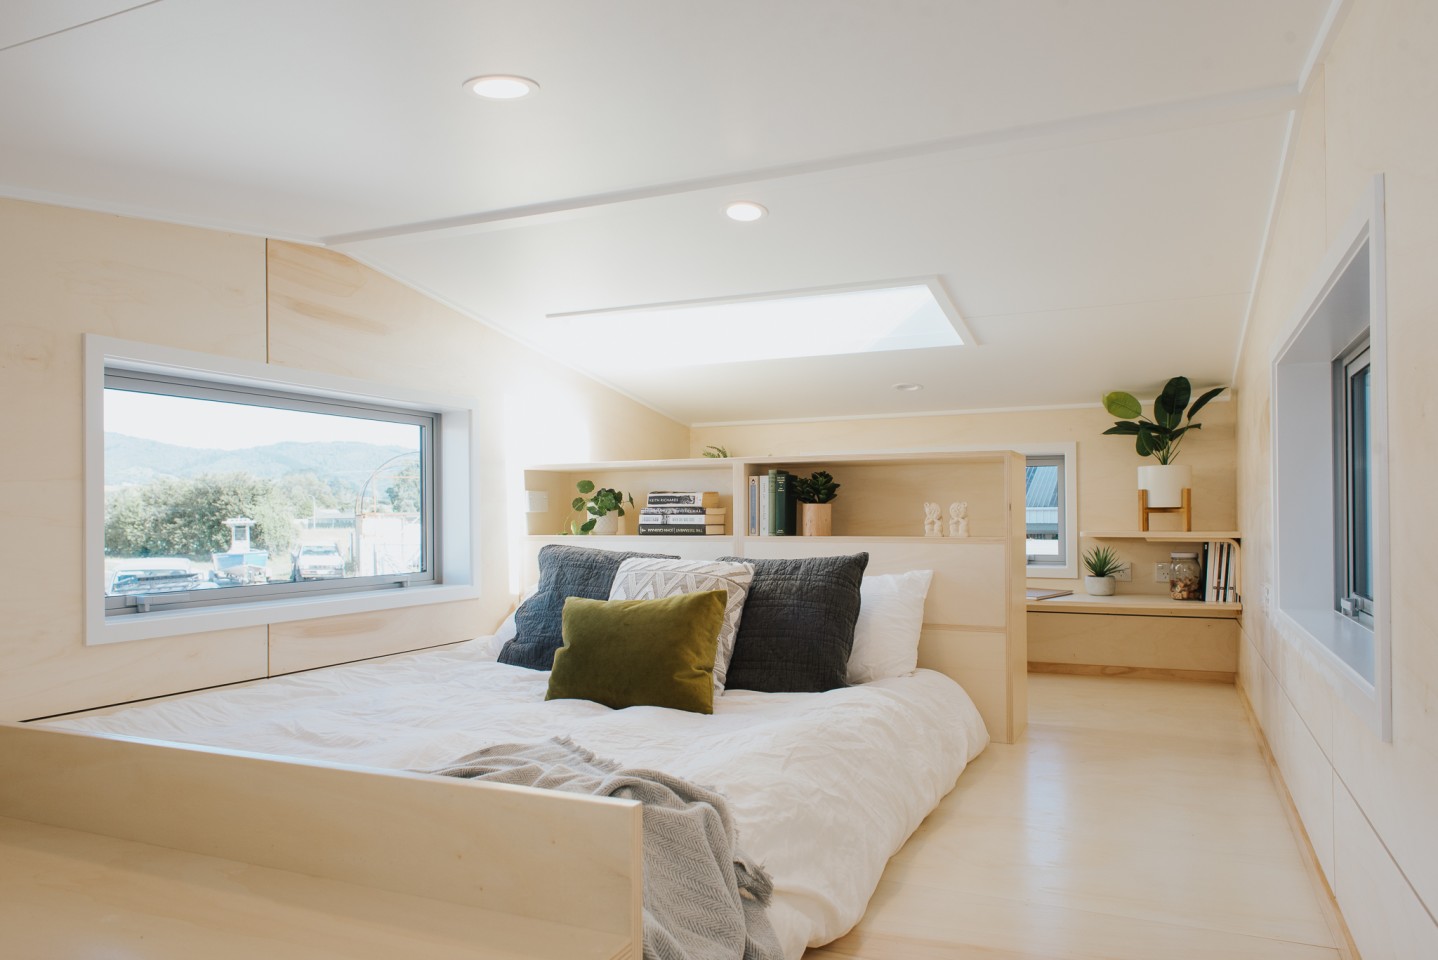 The Wai-Iti Tiny House's bedroom area is topped by a skylight and includes a double bed and some storage space